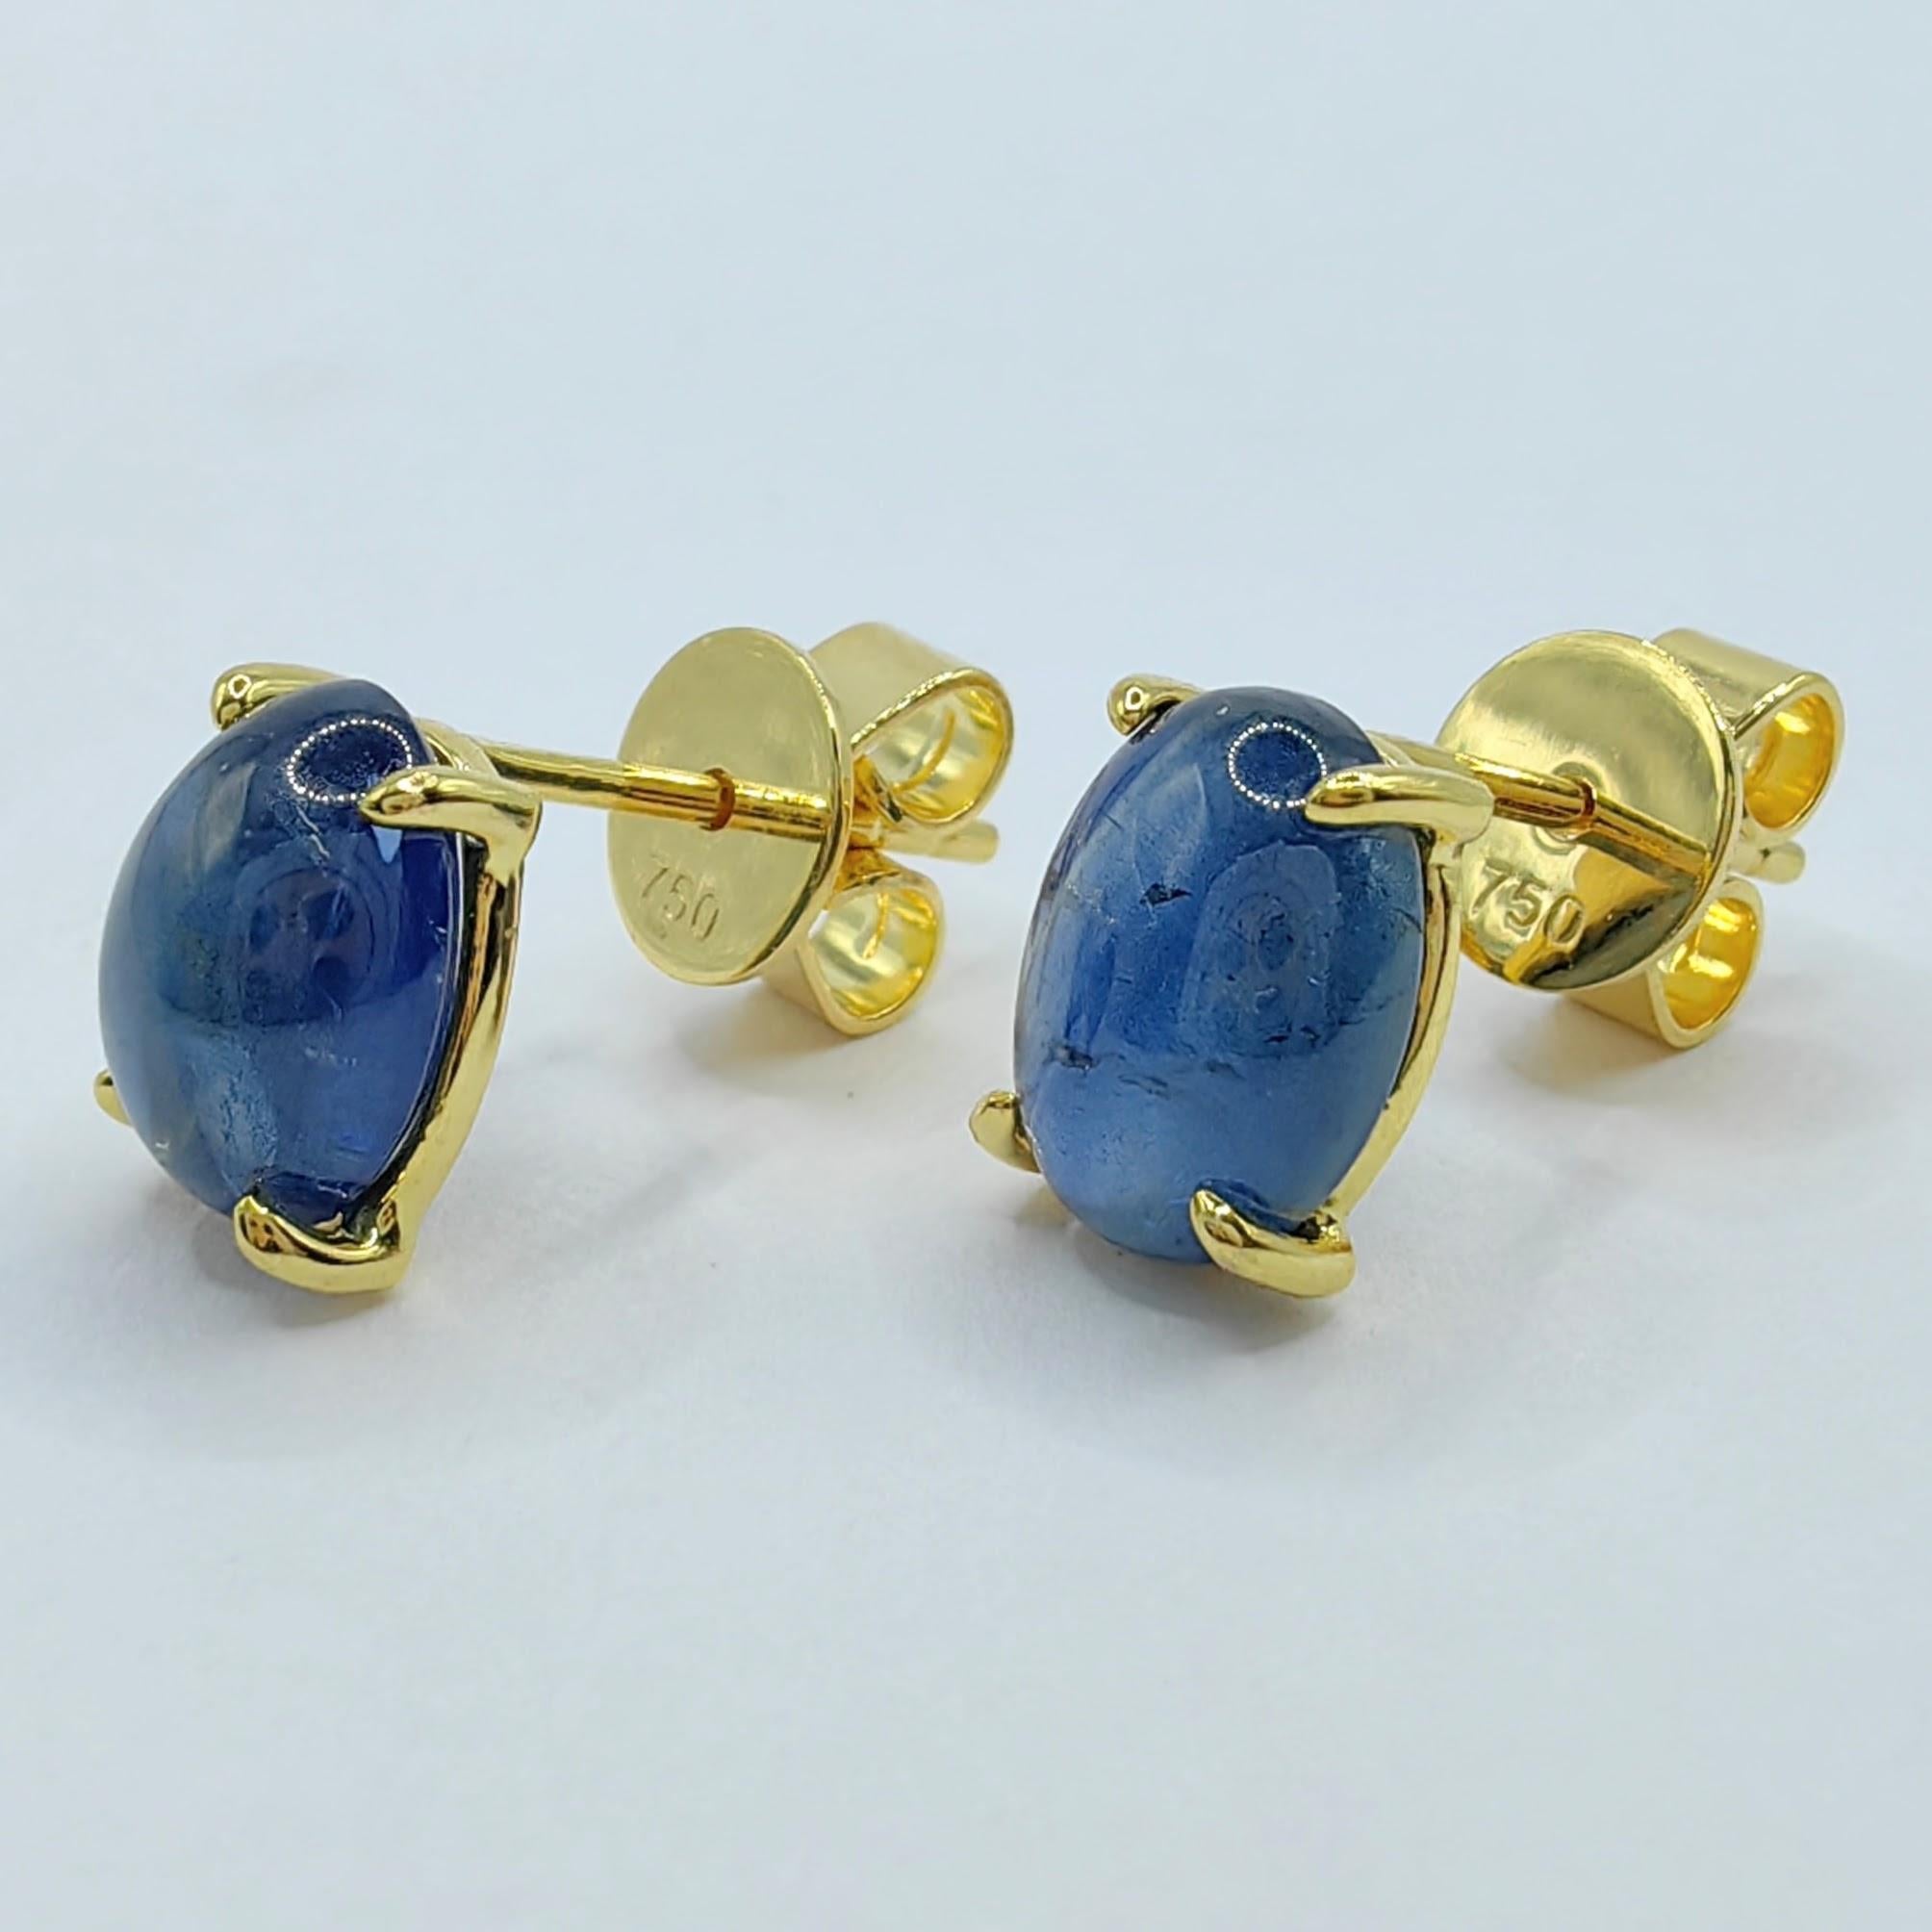 Matched 3.86 Carat 8x6mm Cabochon Blue Sapphire 18K Yellow Gold Stud Earrings For Sale 1